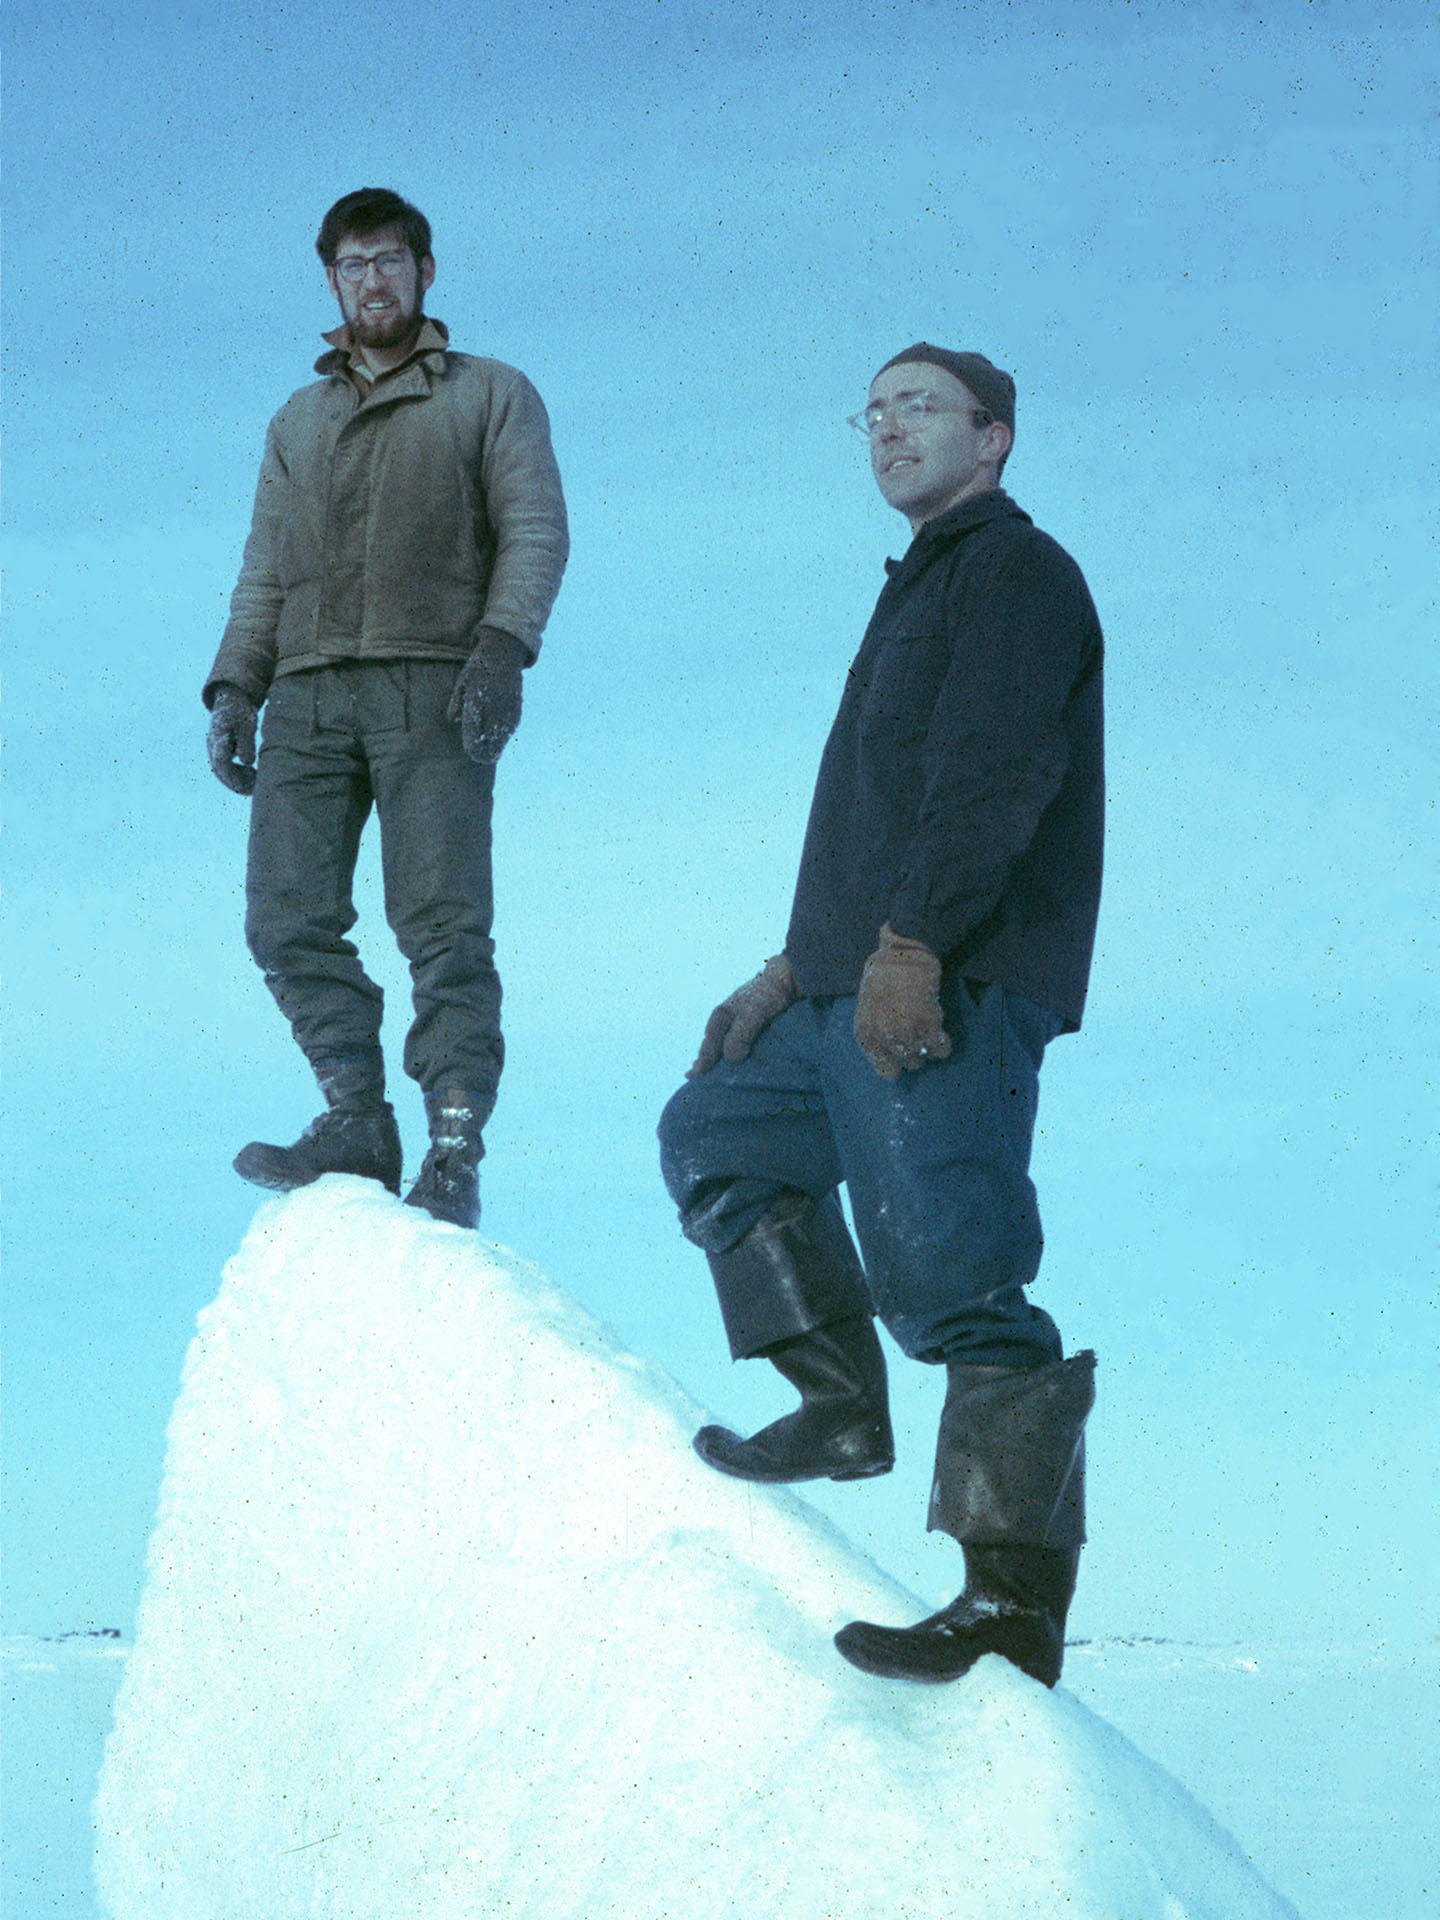 John and his Boss, Columbia University scientist Dr. Ken Hunkins, on a pressure ridge at Ice Station T-3, summer of 1963, in the Arctic Ocean, 700 miles N of Point Barrow, 300 mi S. of North Pole.